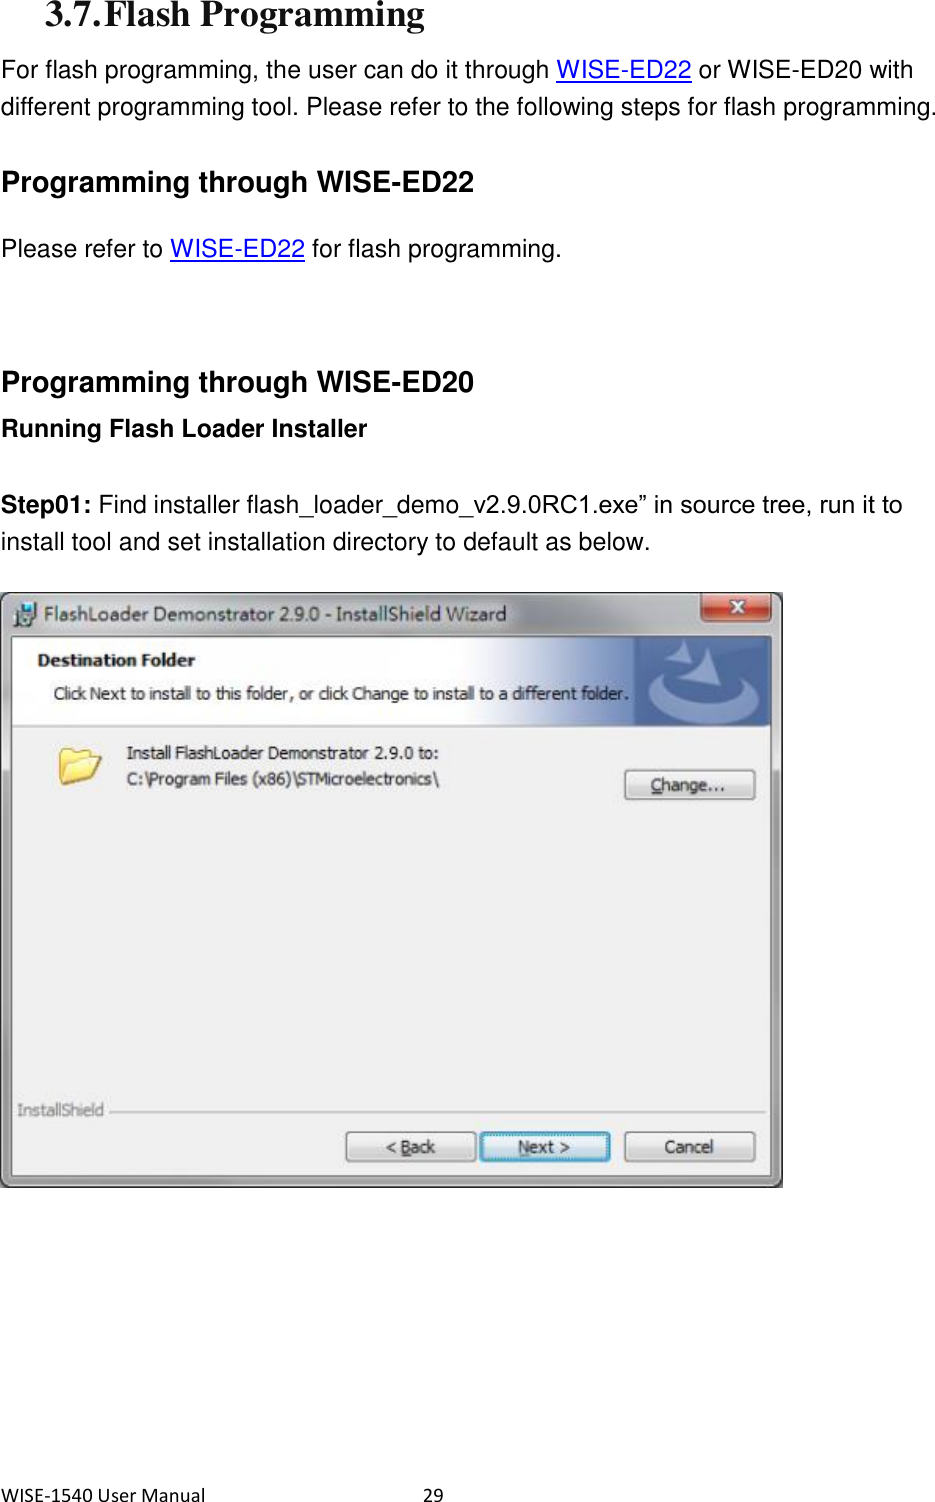 WISE-1540 User Manual  29 3.7. Flash Programming For flash programming, the user can do it through WISE-ED22 or WISE-ED20 with different programming tool. Please refer to the following steps for flash programming.  Programming through WISE-ED22 Please refer to WISE-ED22 for flash programming.    Programming through WISE-ED20 Running Flash Loader Installer Step01: Find installer flash_loader_demo_v2.9.0RC1.exe” in source tree, run it to install tool and set installation directory to default as below.       